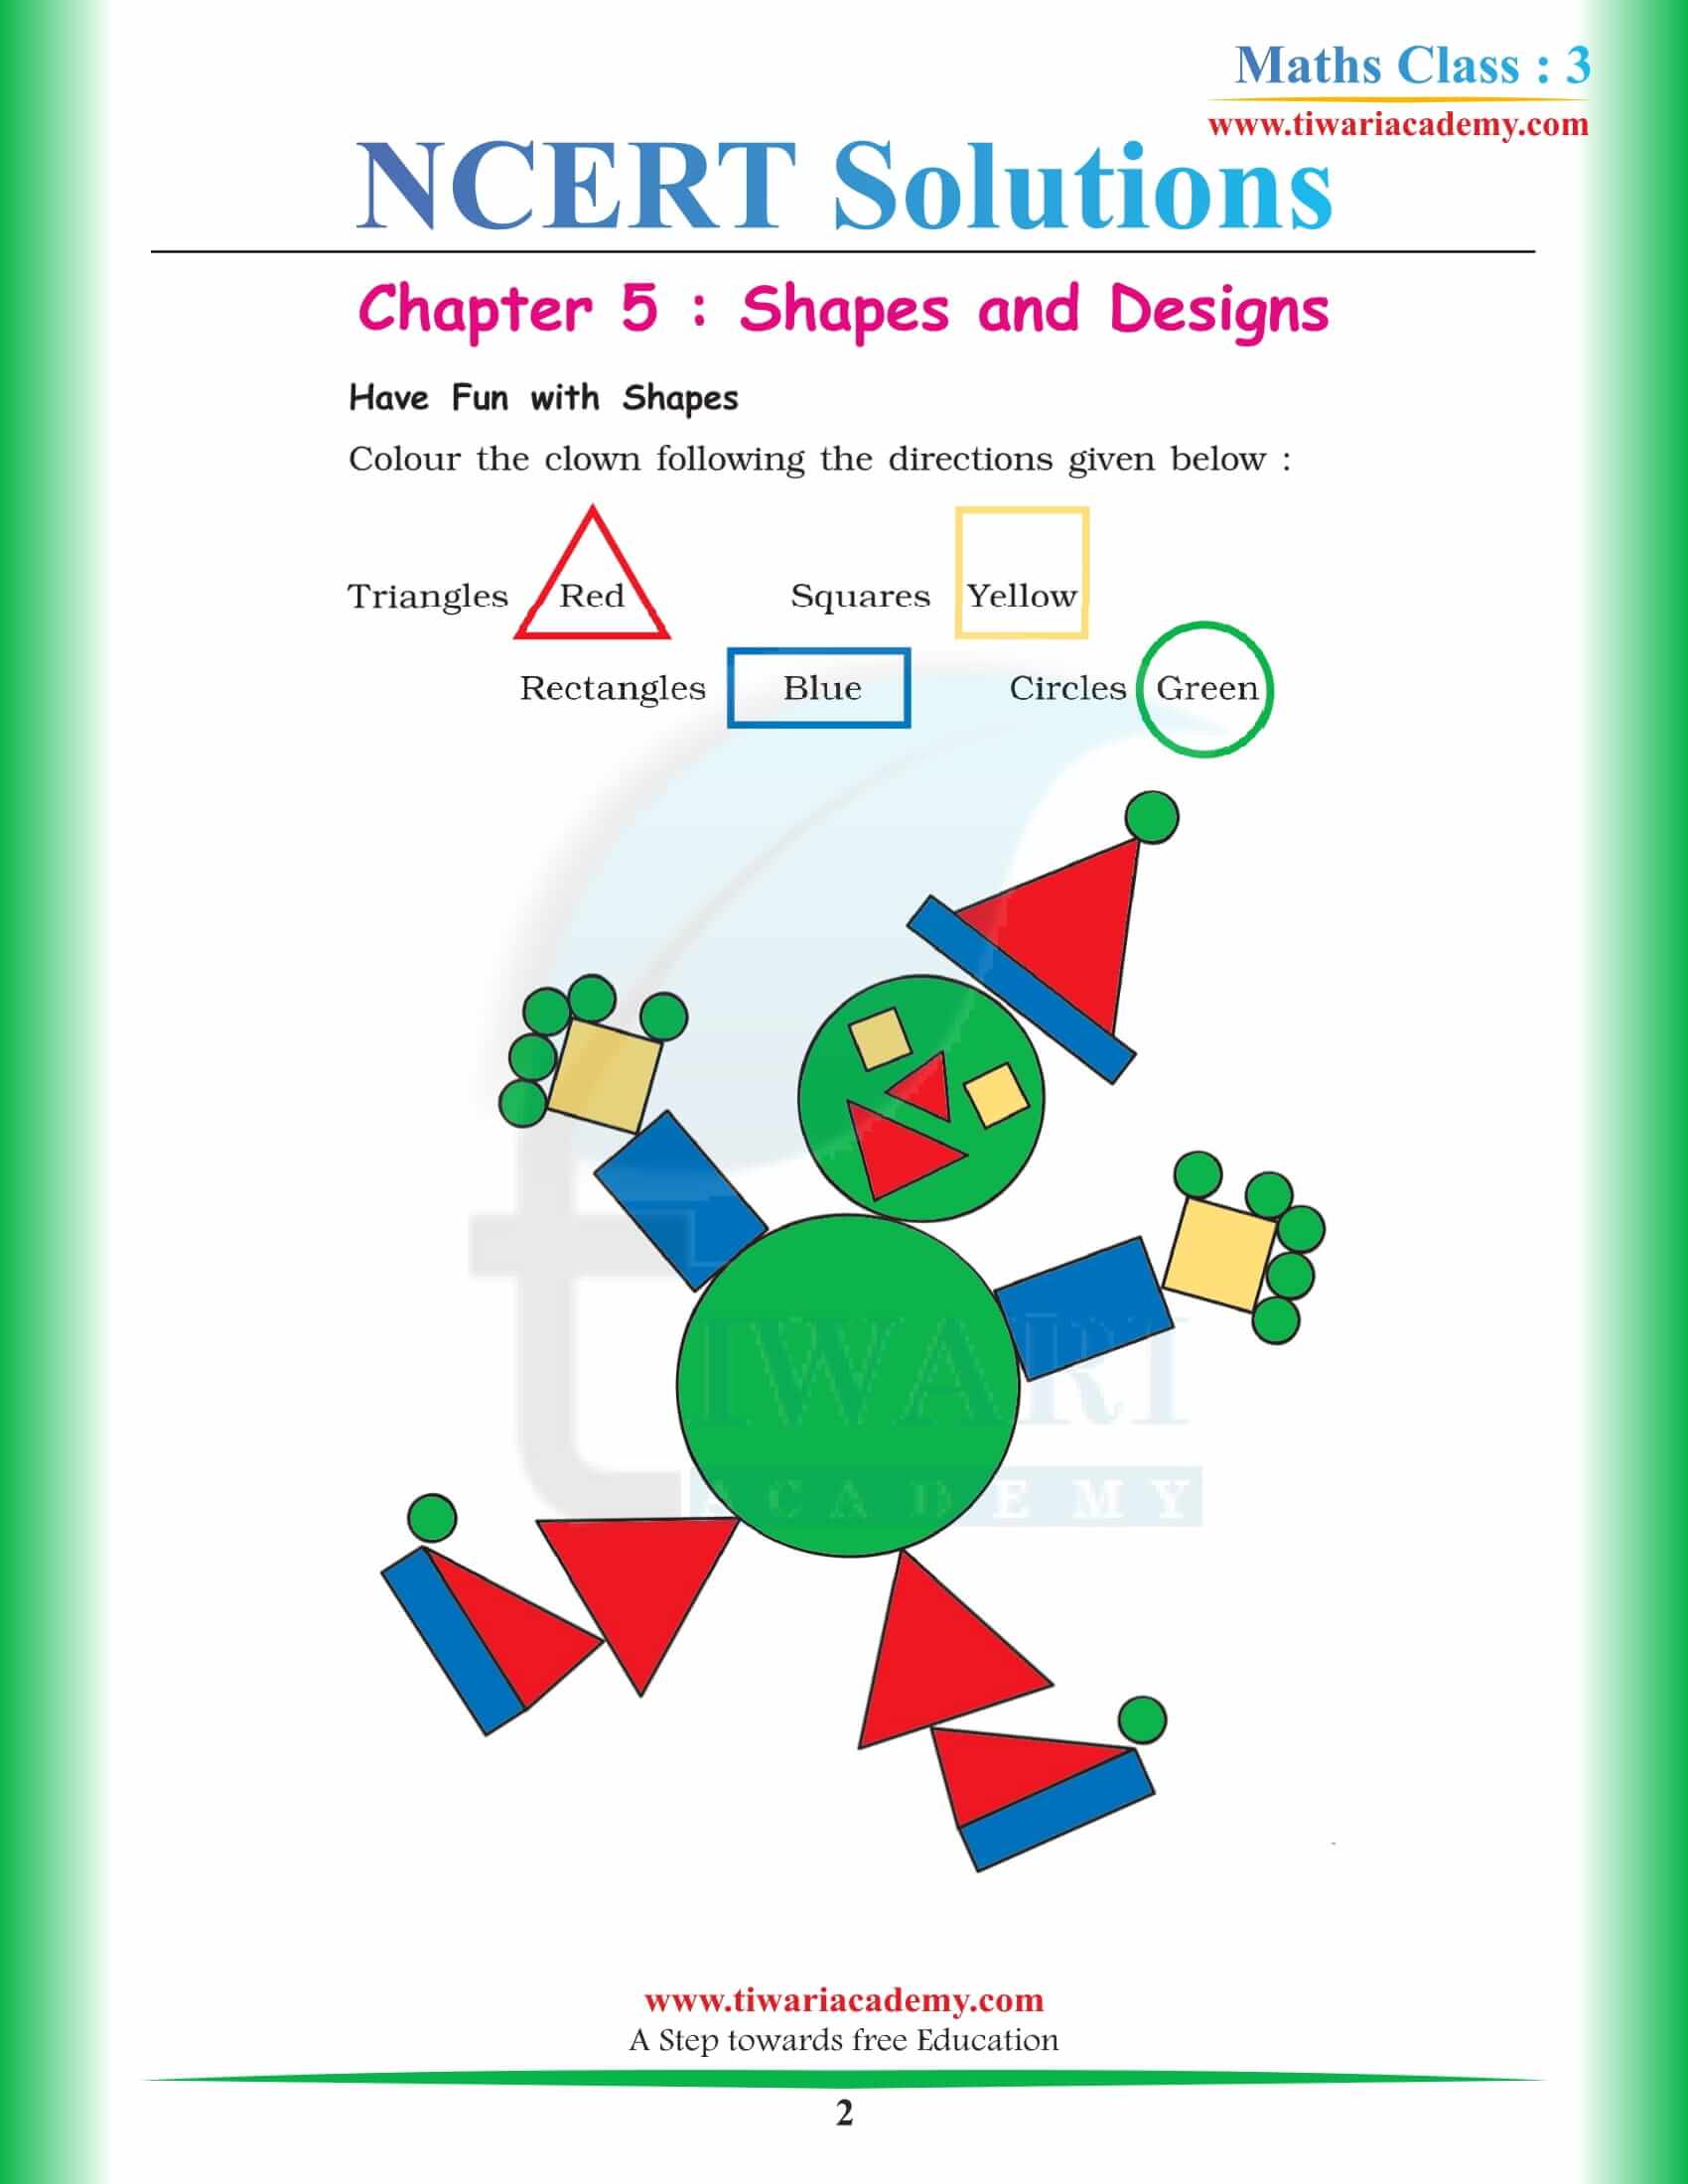 NCERT Solutions for Class 3 Maths Chapter 5 Shapes and Designs free download